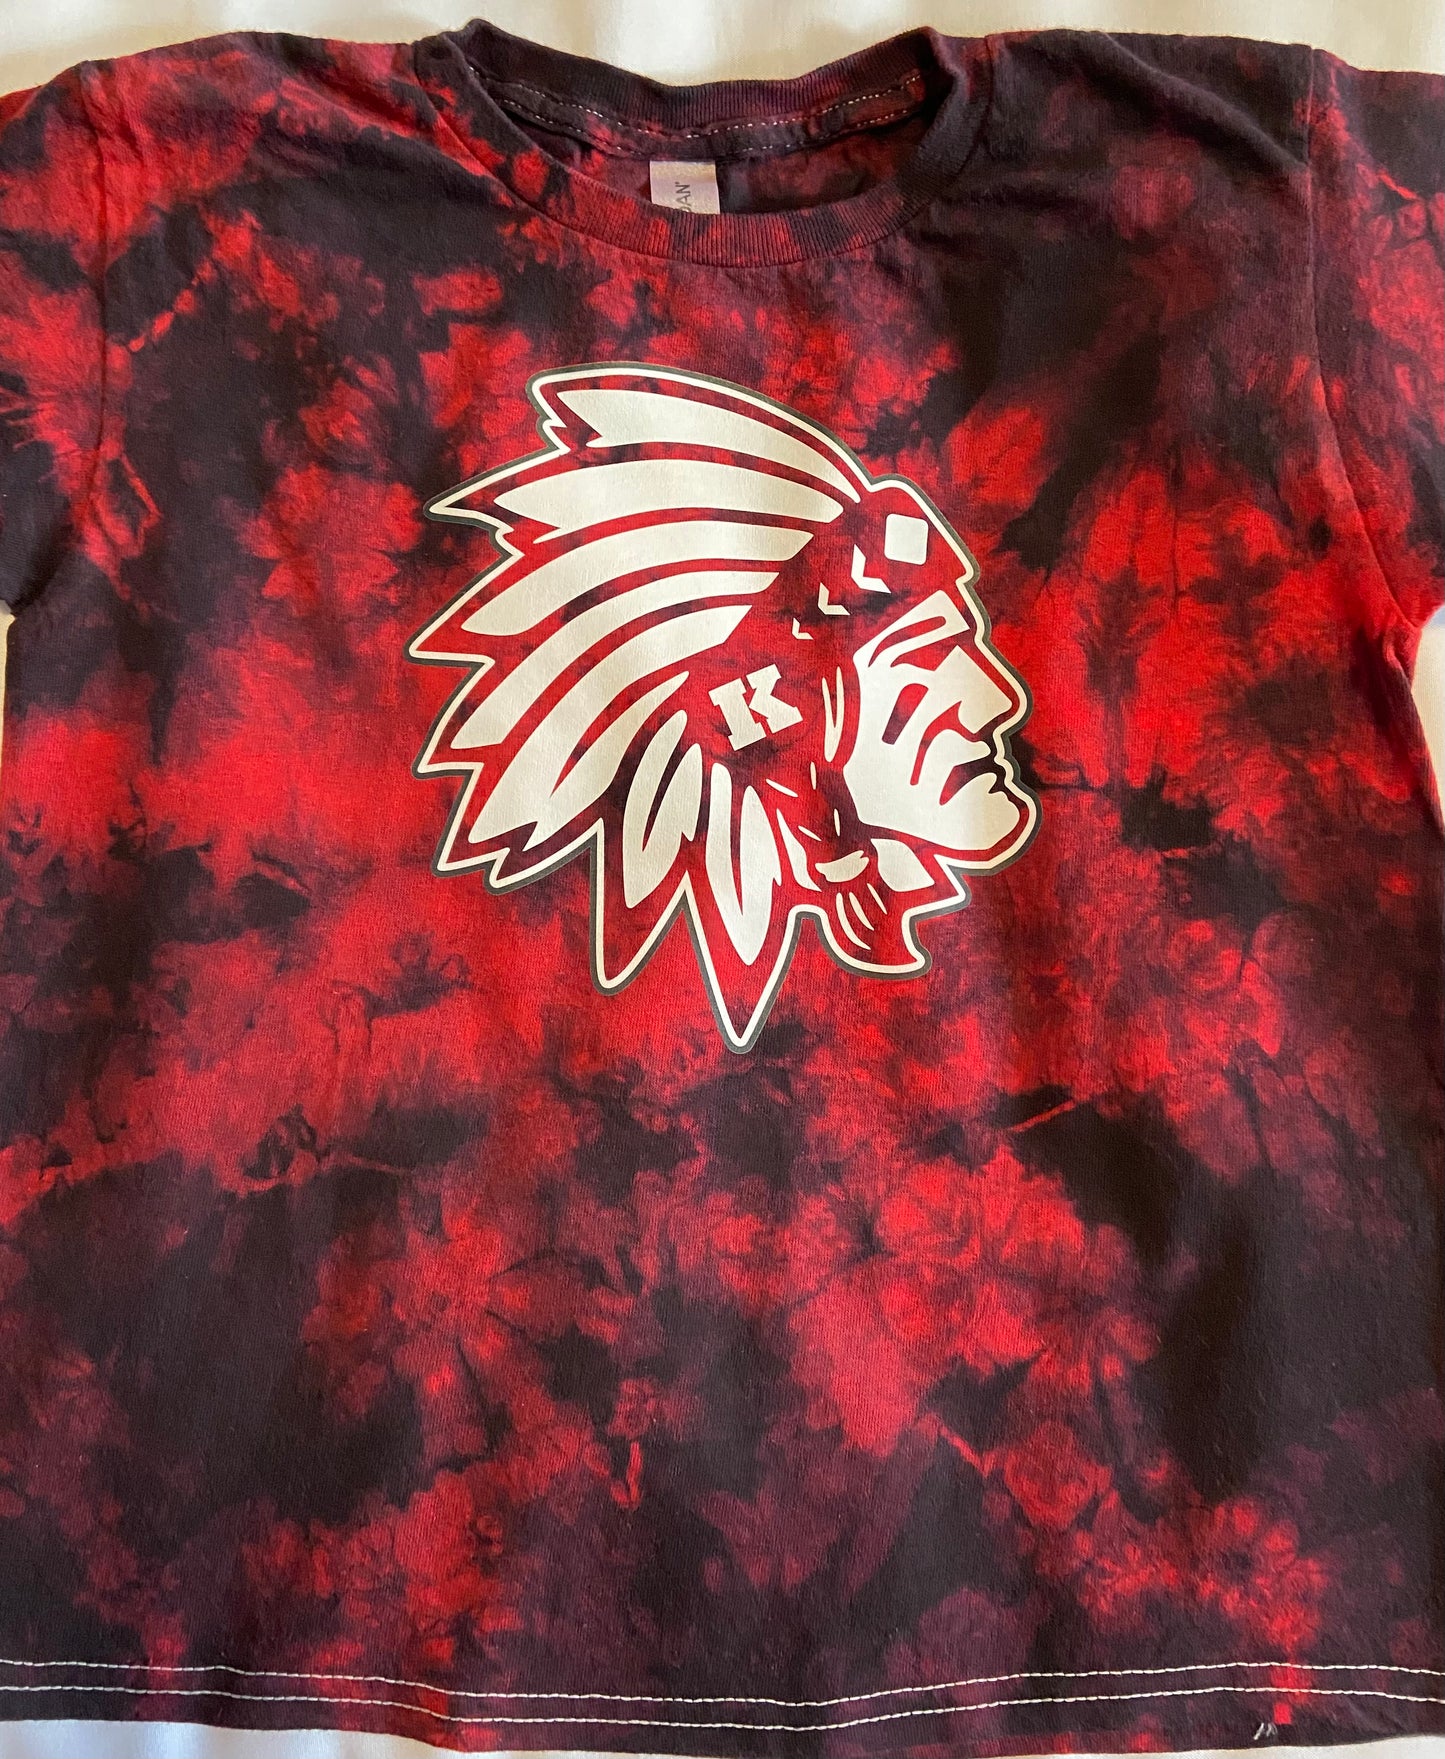 Knox Redskins Tie Dye T-Shirt - Red/Black Crystal TieDye - Heavy Cotton - Adult and Youth